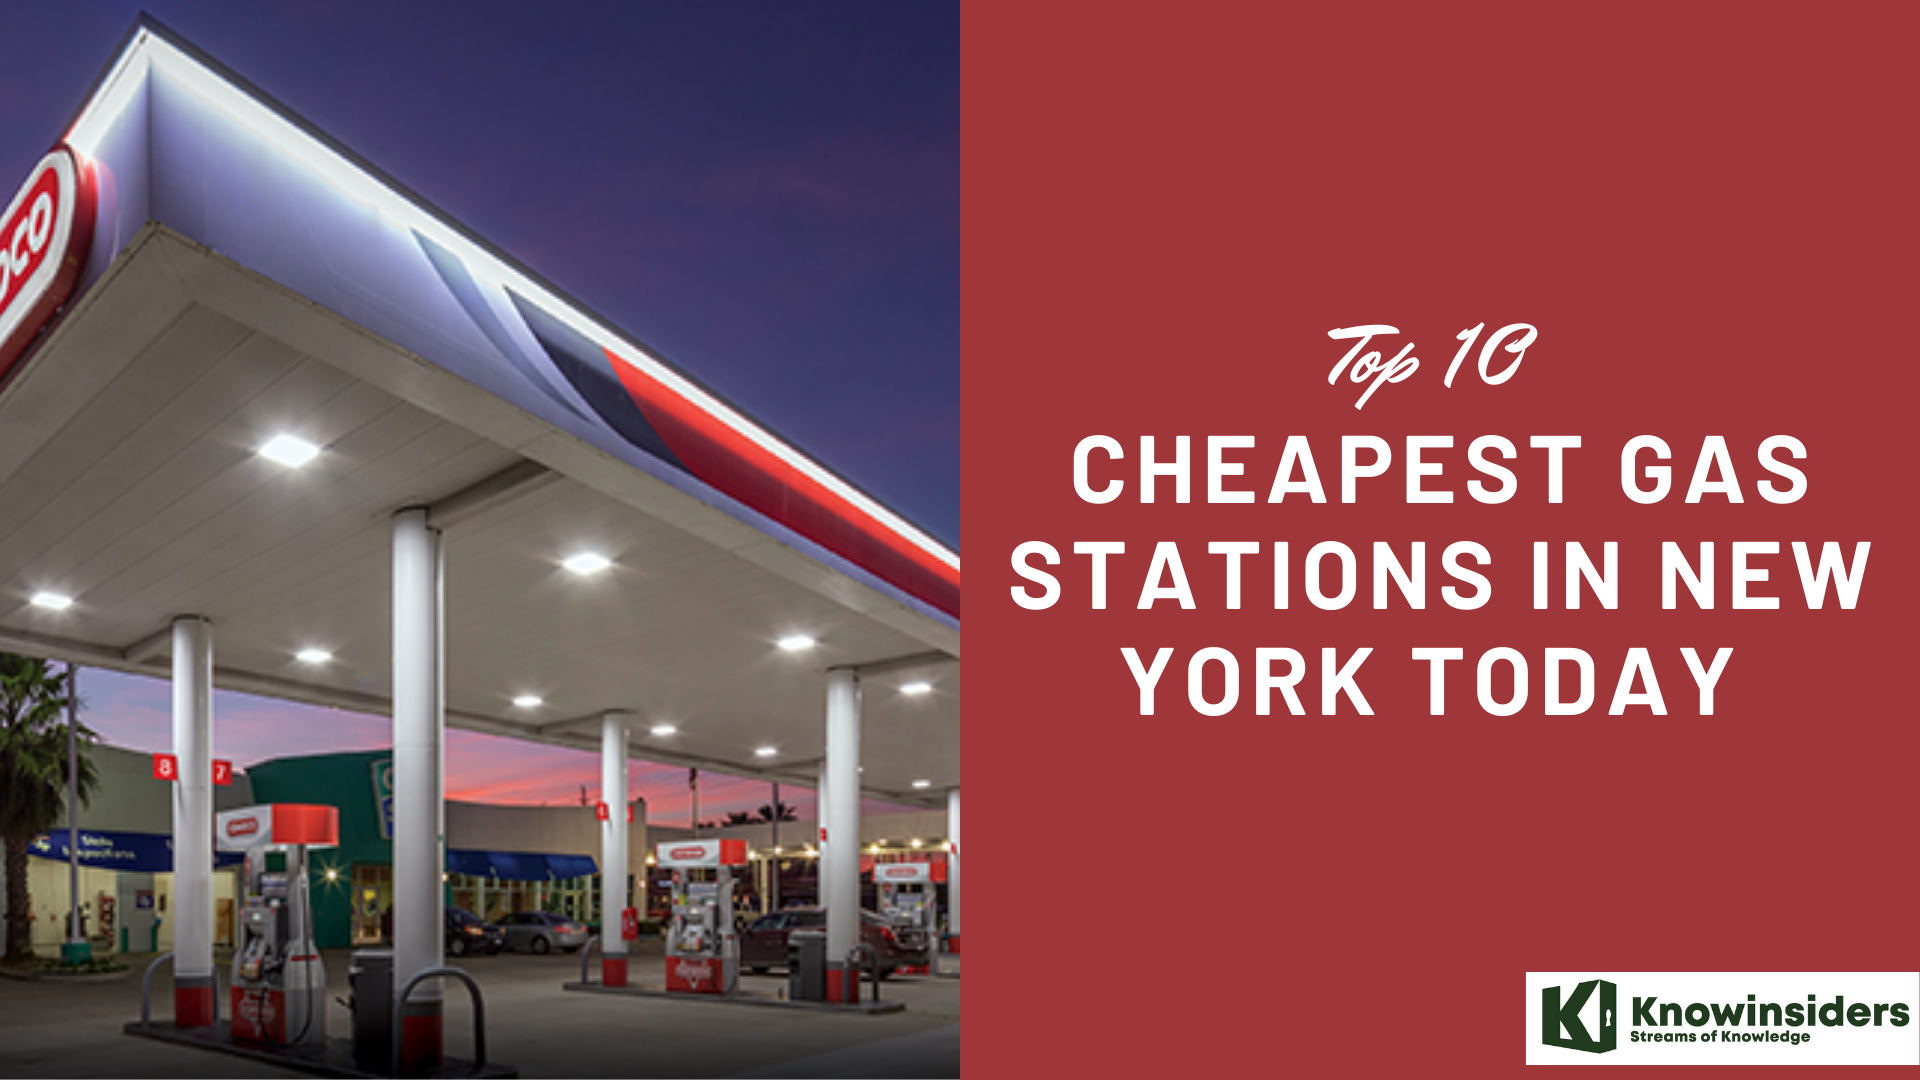 Top 10 Cheapest Gas Stations In New York That You Keep in Mind